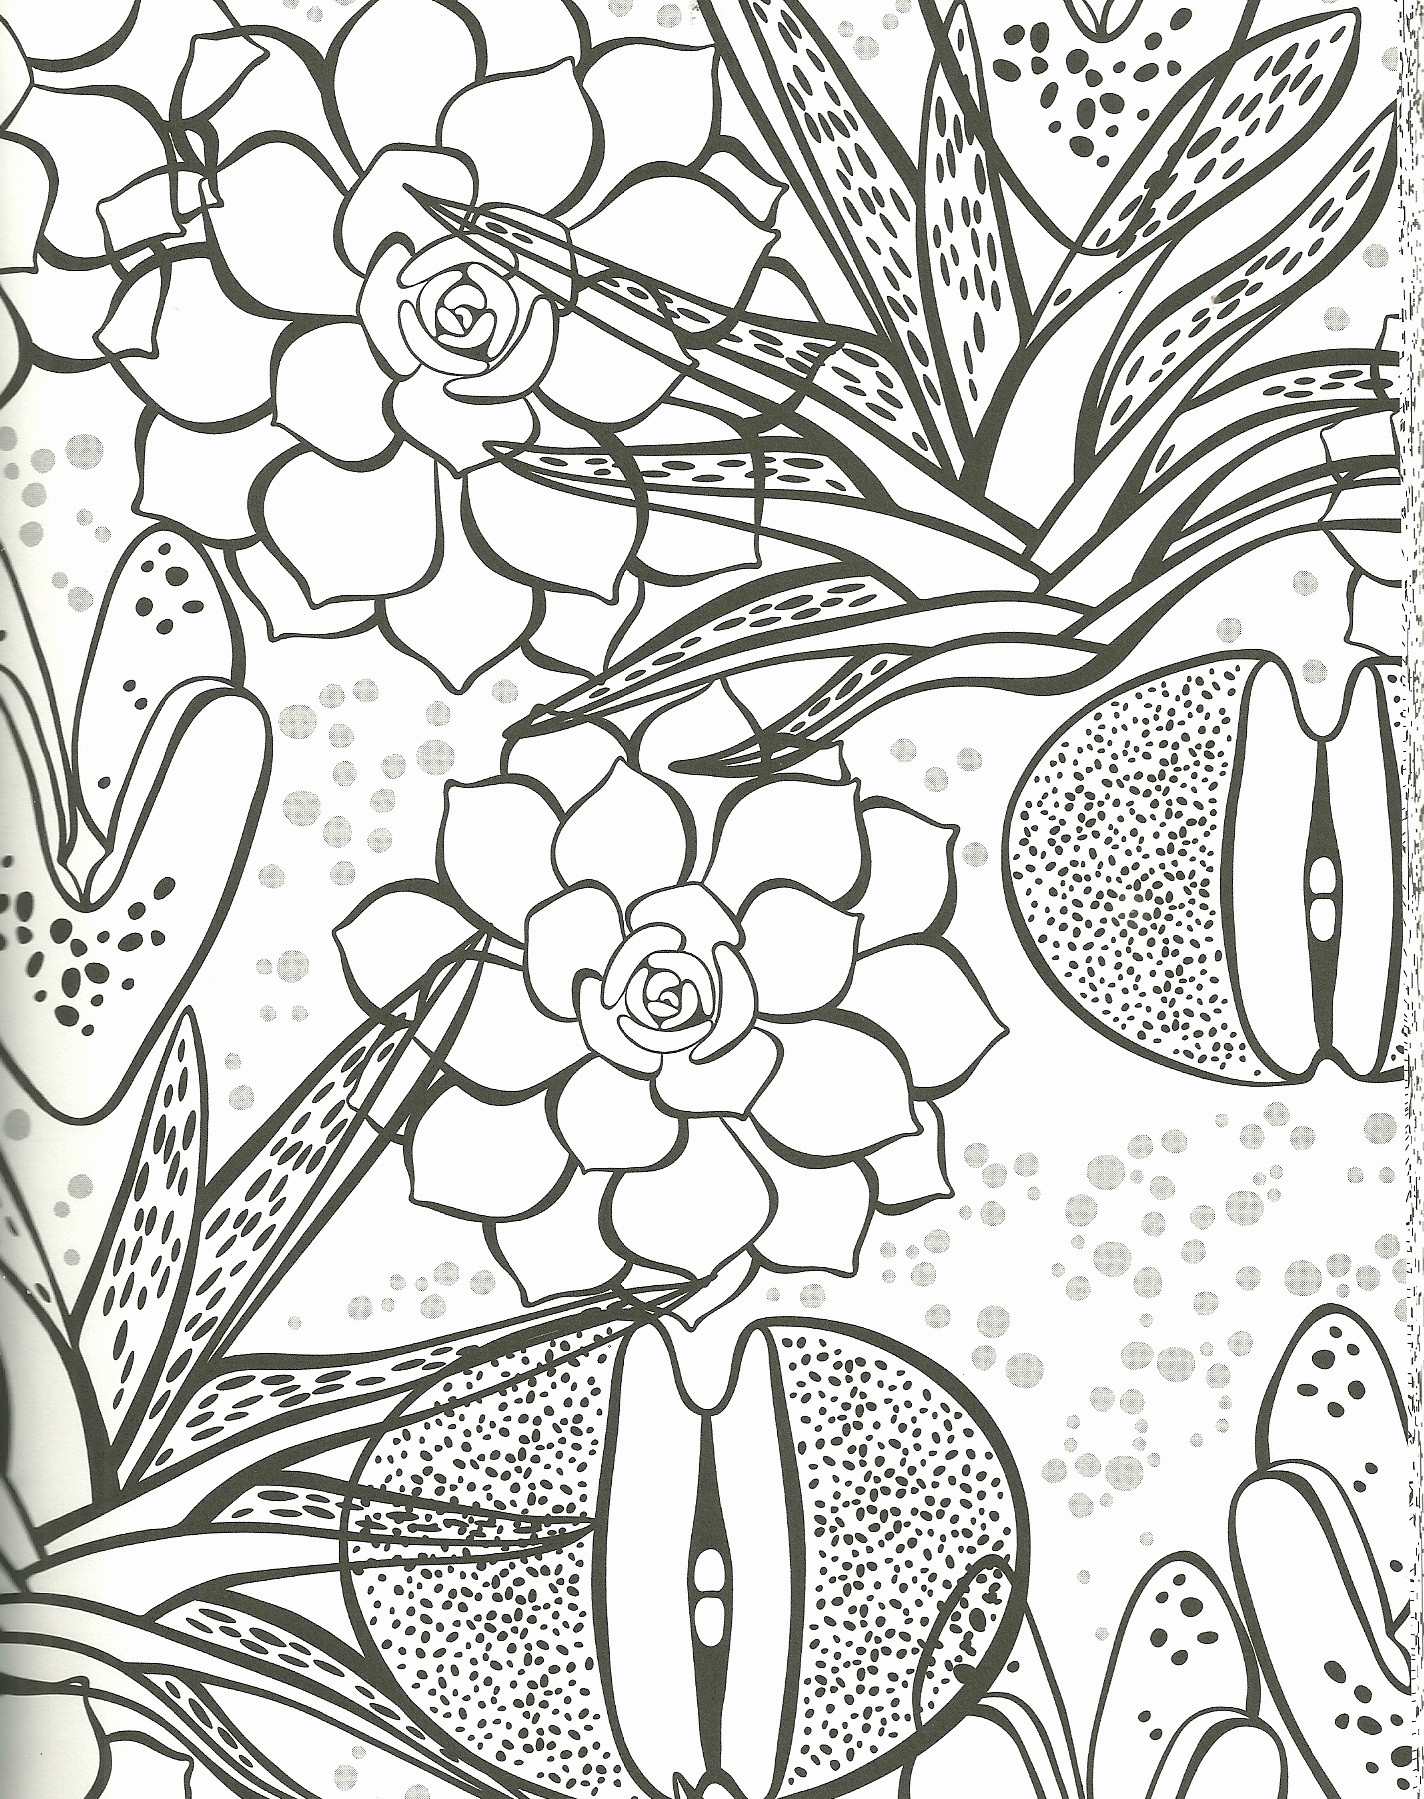 12 Famous Picture Of A Flower Vase to Color 2024 free download picture of a flower vase to color of flowers coloring pages update cool vases flower vase coloring page regarding download image